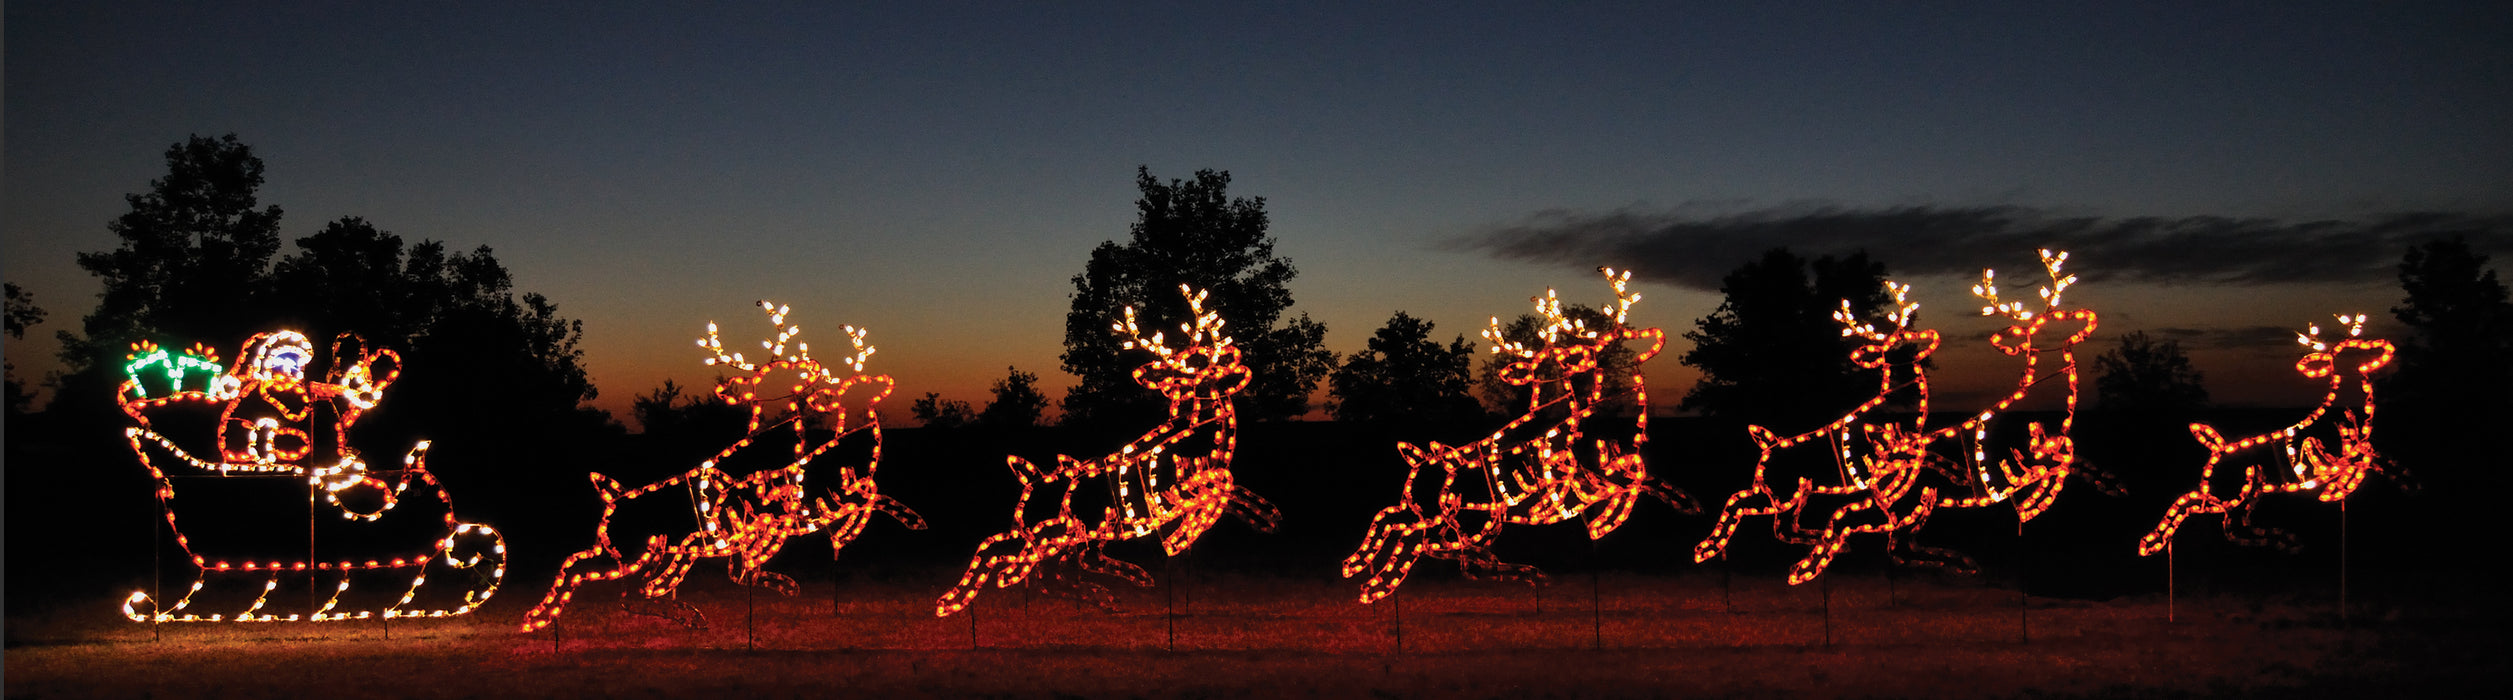 giant, life-size, commercial-grade, outdoor, Christmas, holiday, LED, bulb, lights, aluminum frame, quality, durable, motif, display, 2021, animated, reindeer, decoration, santa, sleigh, toys, bag of toys, santa's sleigh and reindeer